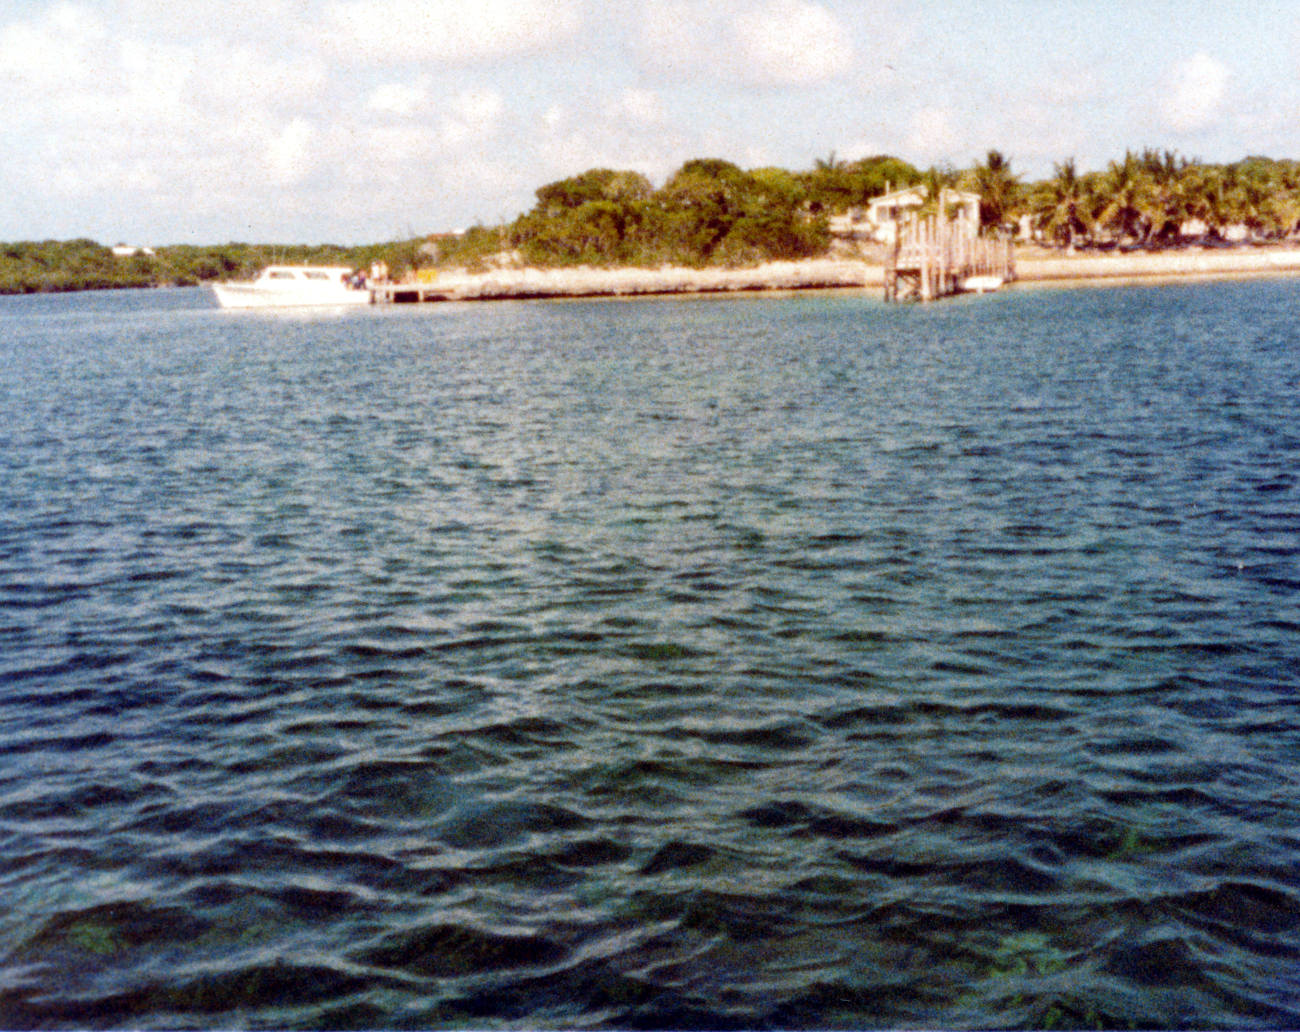 View of island from the Alan's boat